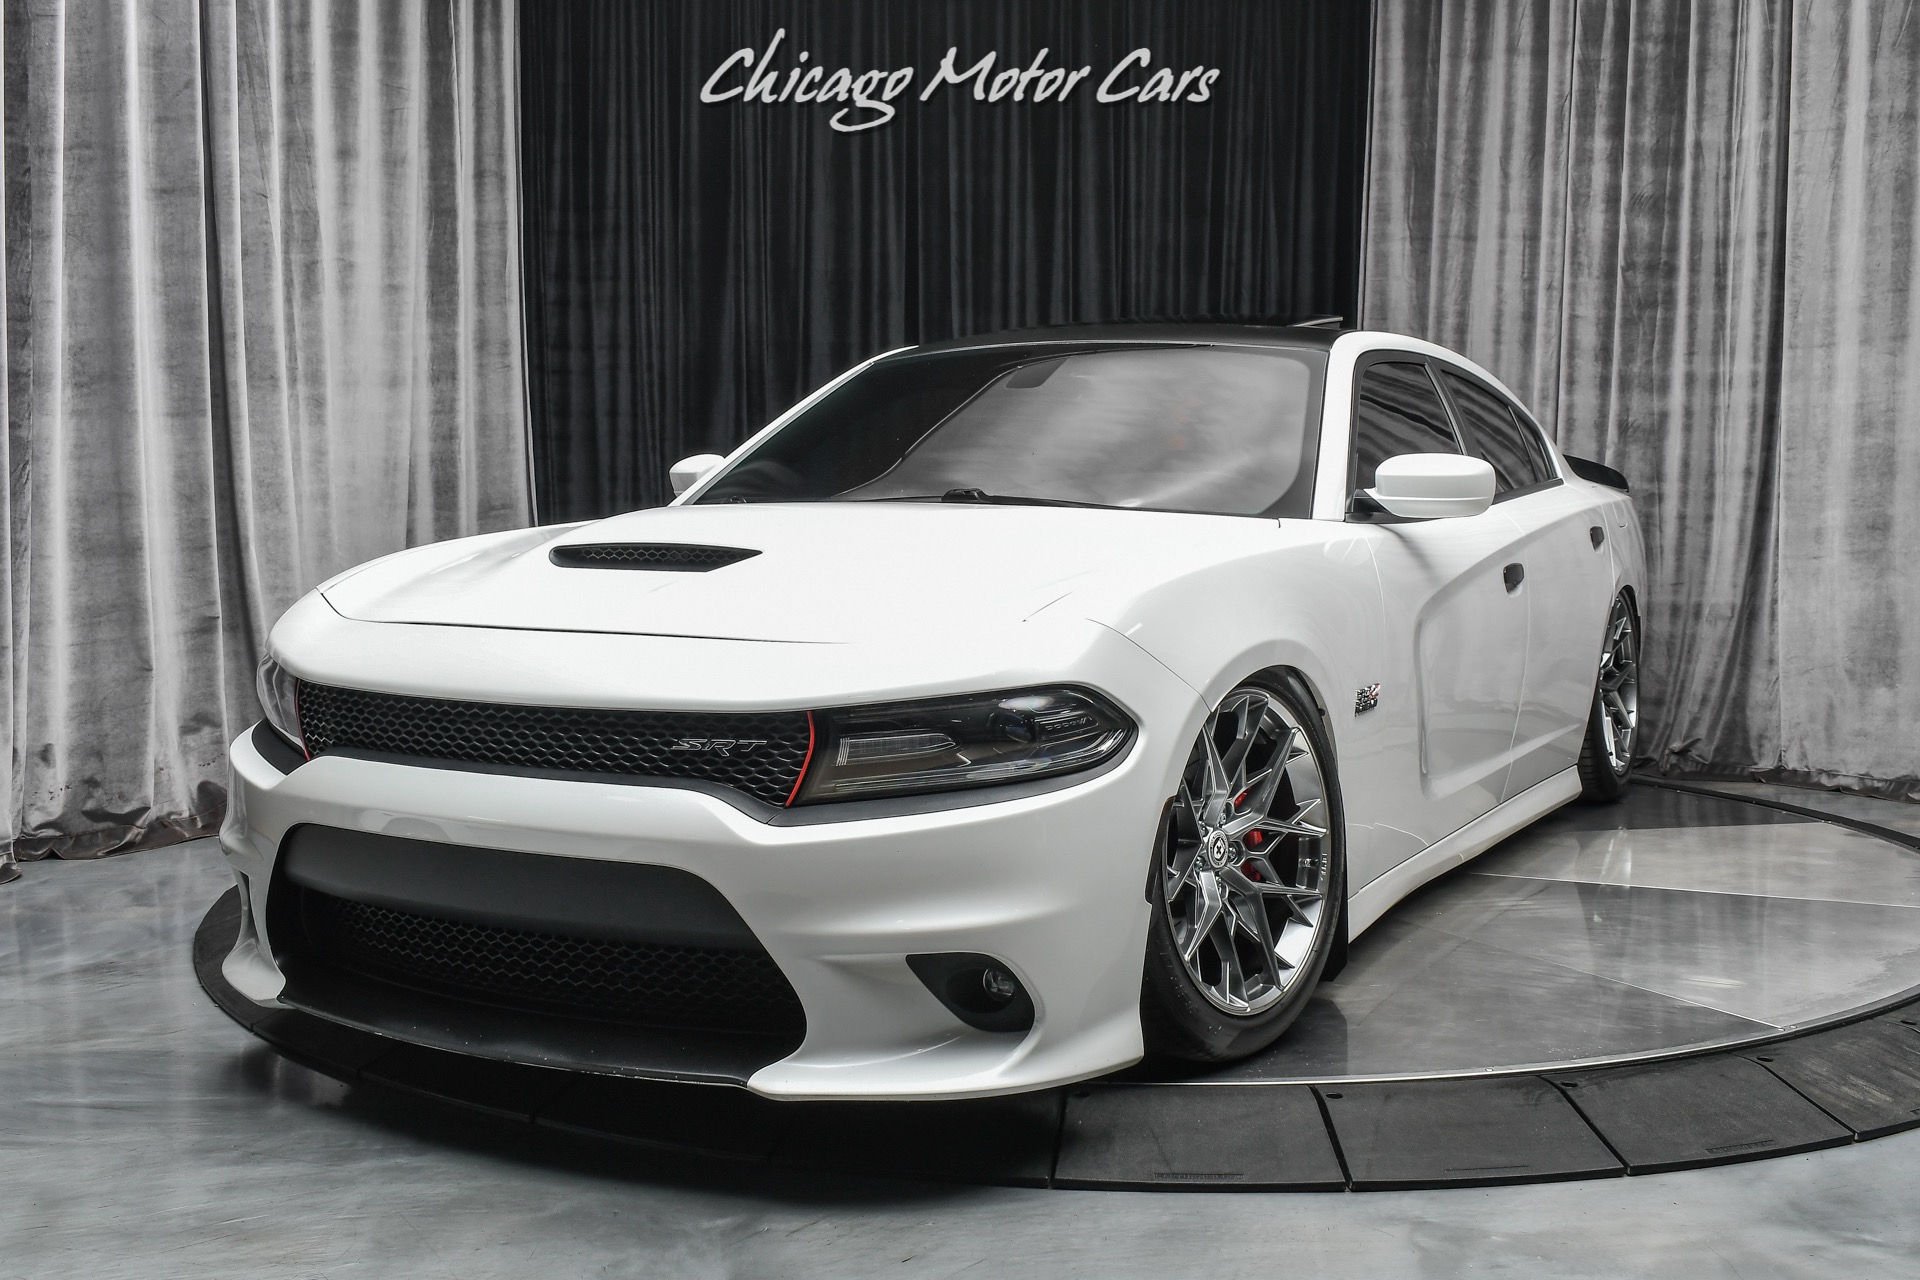 Used-2016-Dodge-Charger-RT-Scat-Pack-MSRP-47K-ALCANTARA-INTERIOR-SUNROOF-FORGED-WHEELS